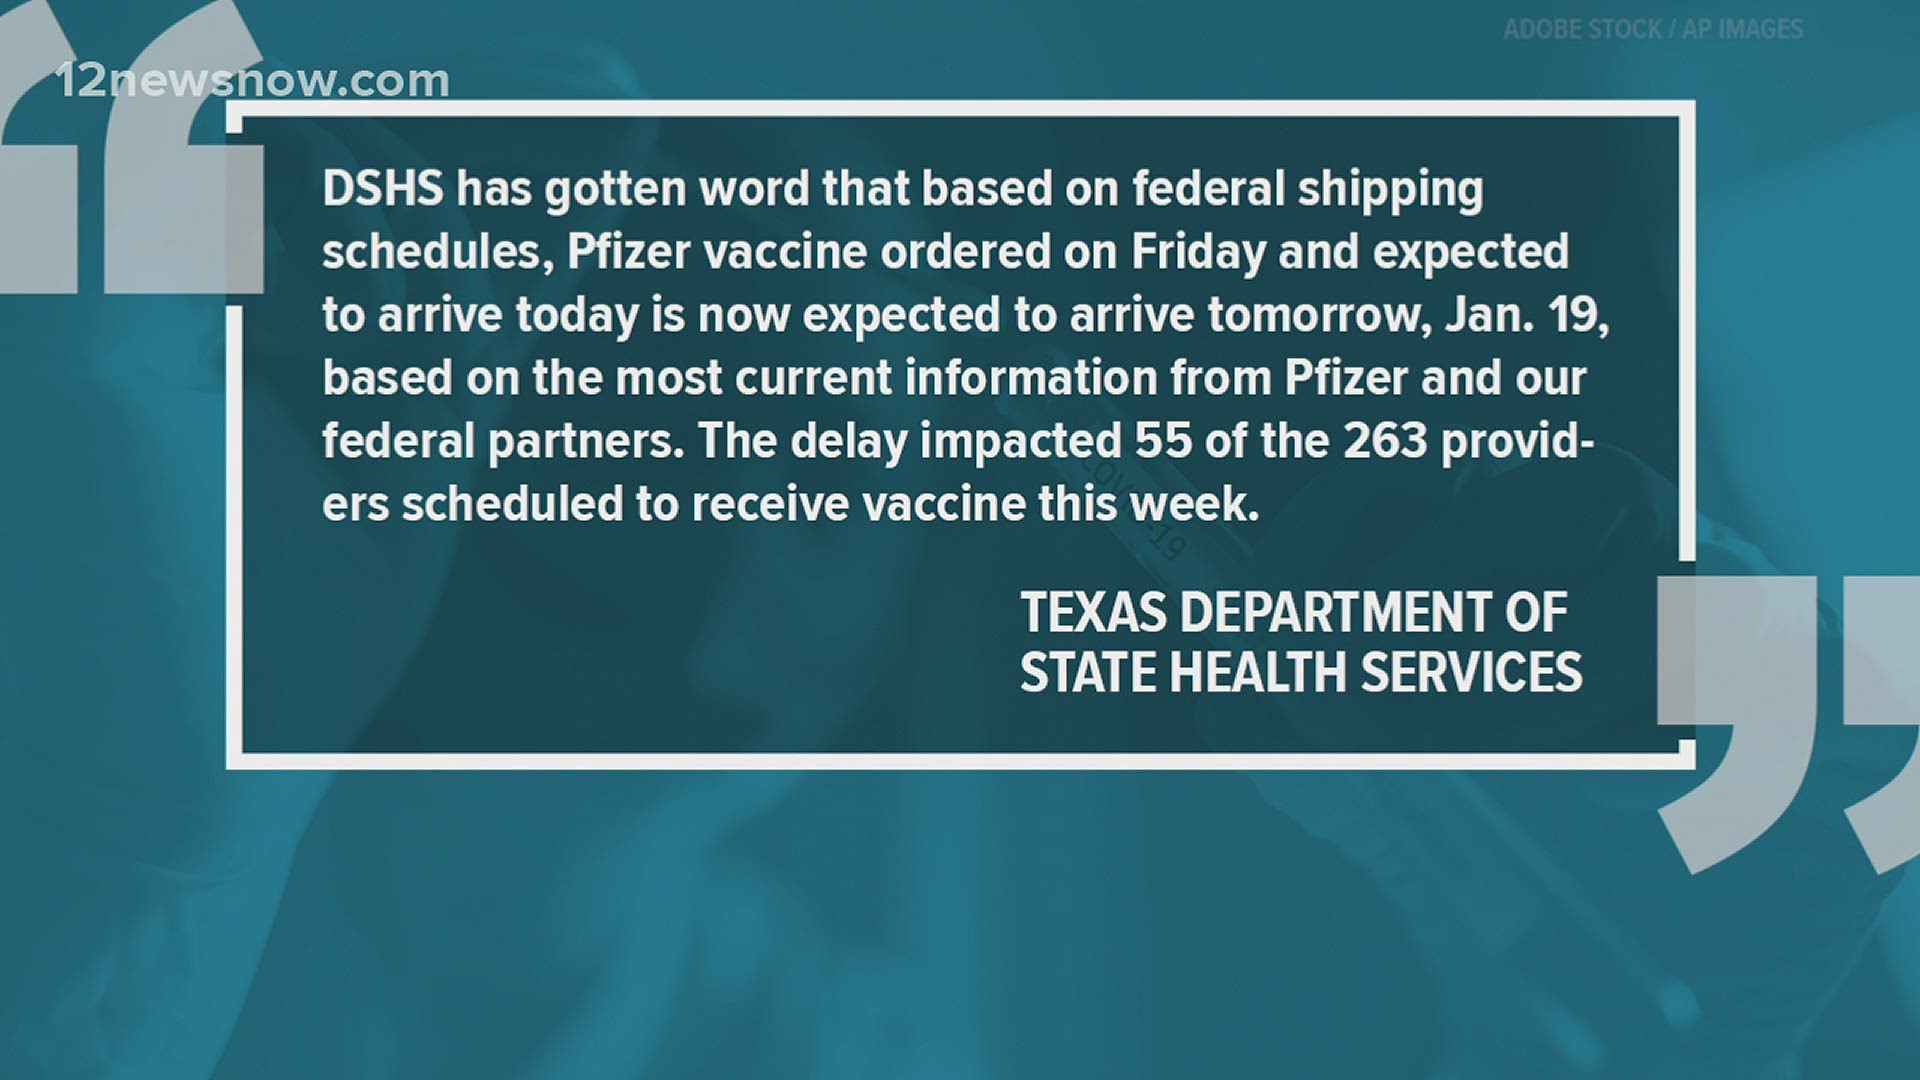 The delay impacted 55 of the 263 providers scheduled to receive the vaccine this week.